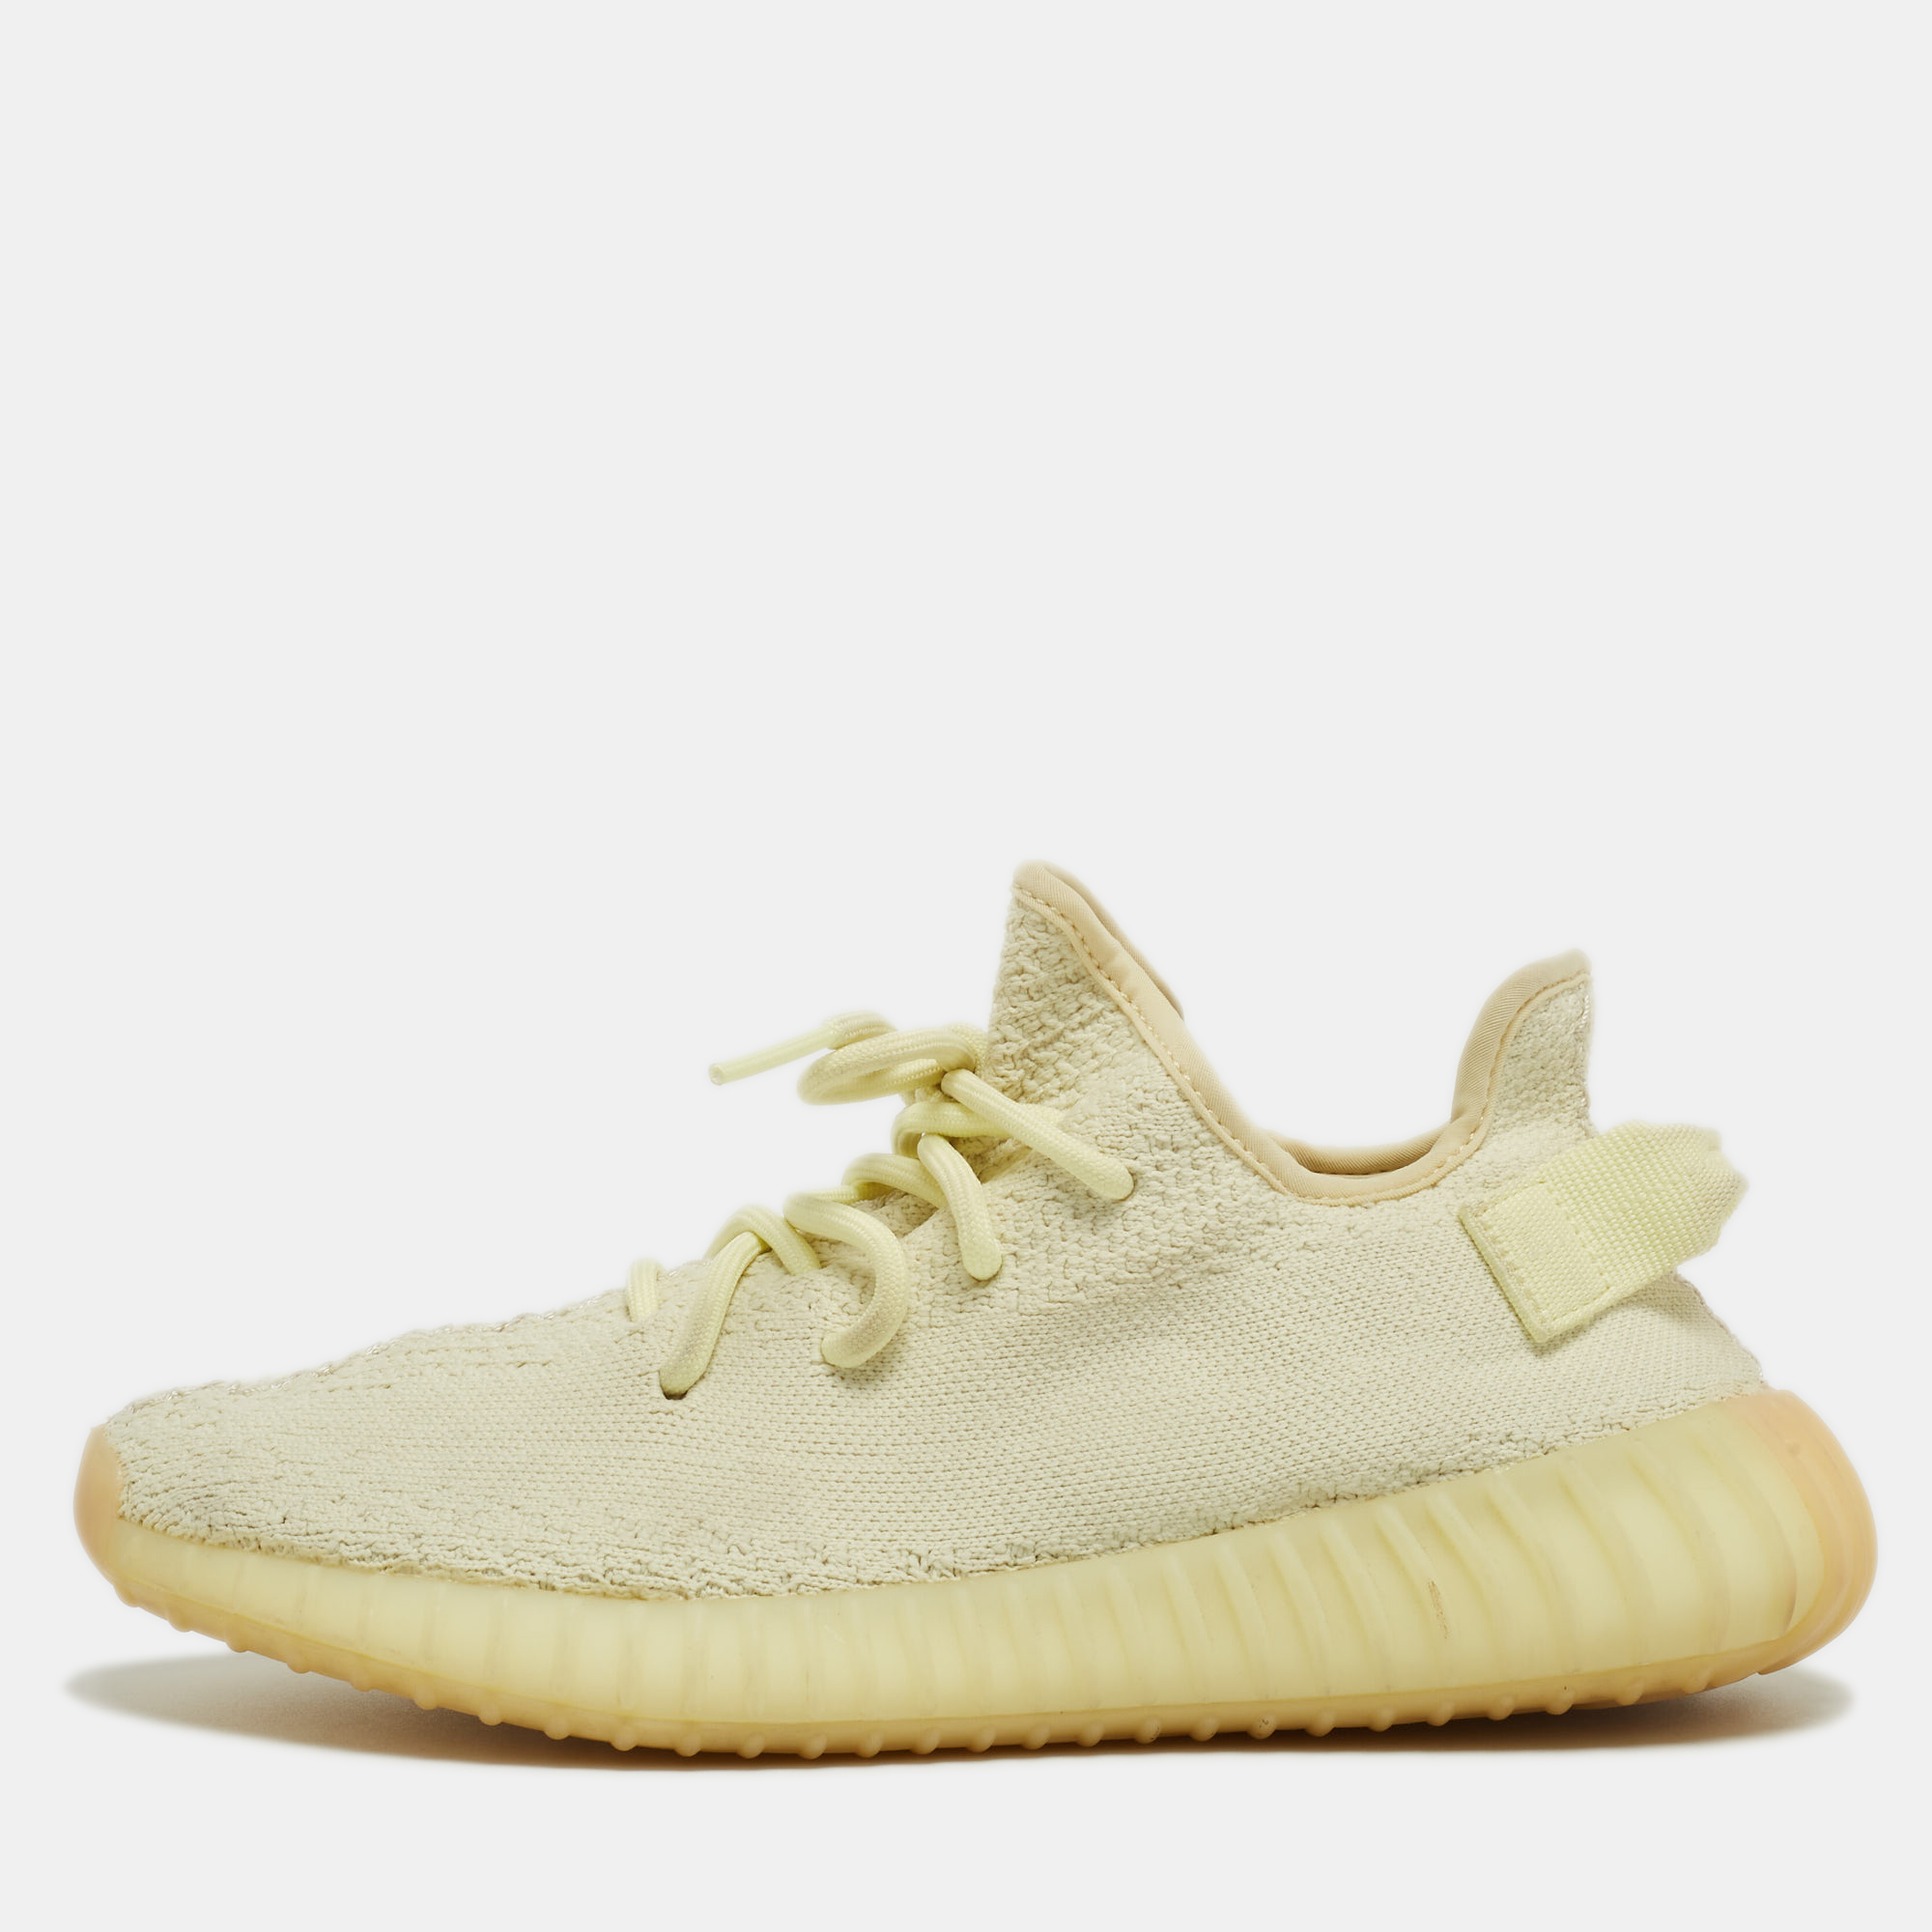 

Yeezy x Adidas Light Yellow Knit Fabric Boost 350 V2 Butter Sneakers Size  1/3